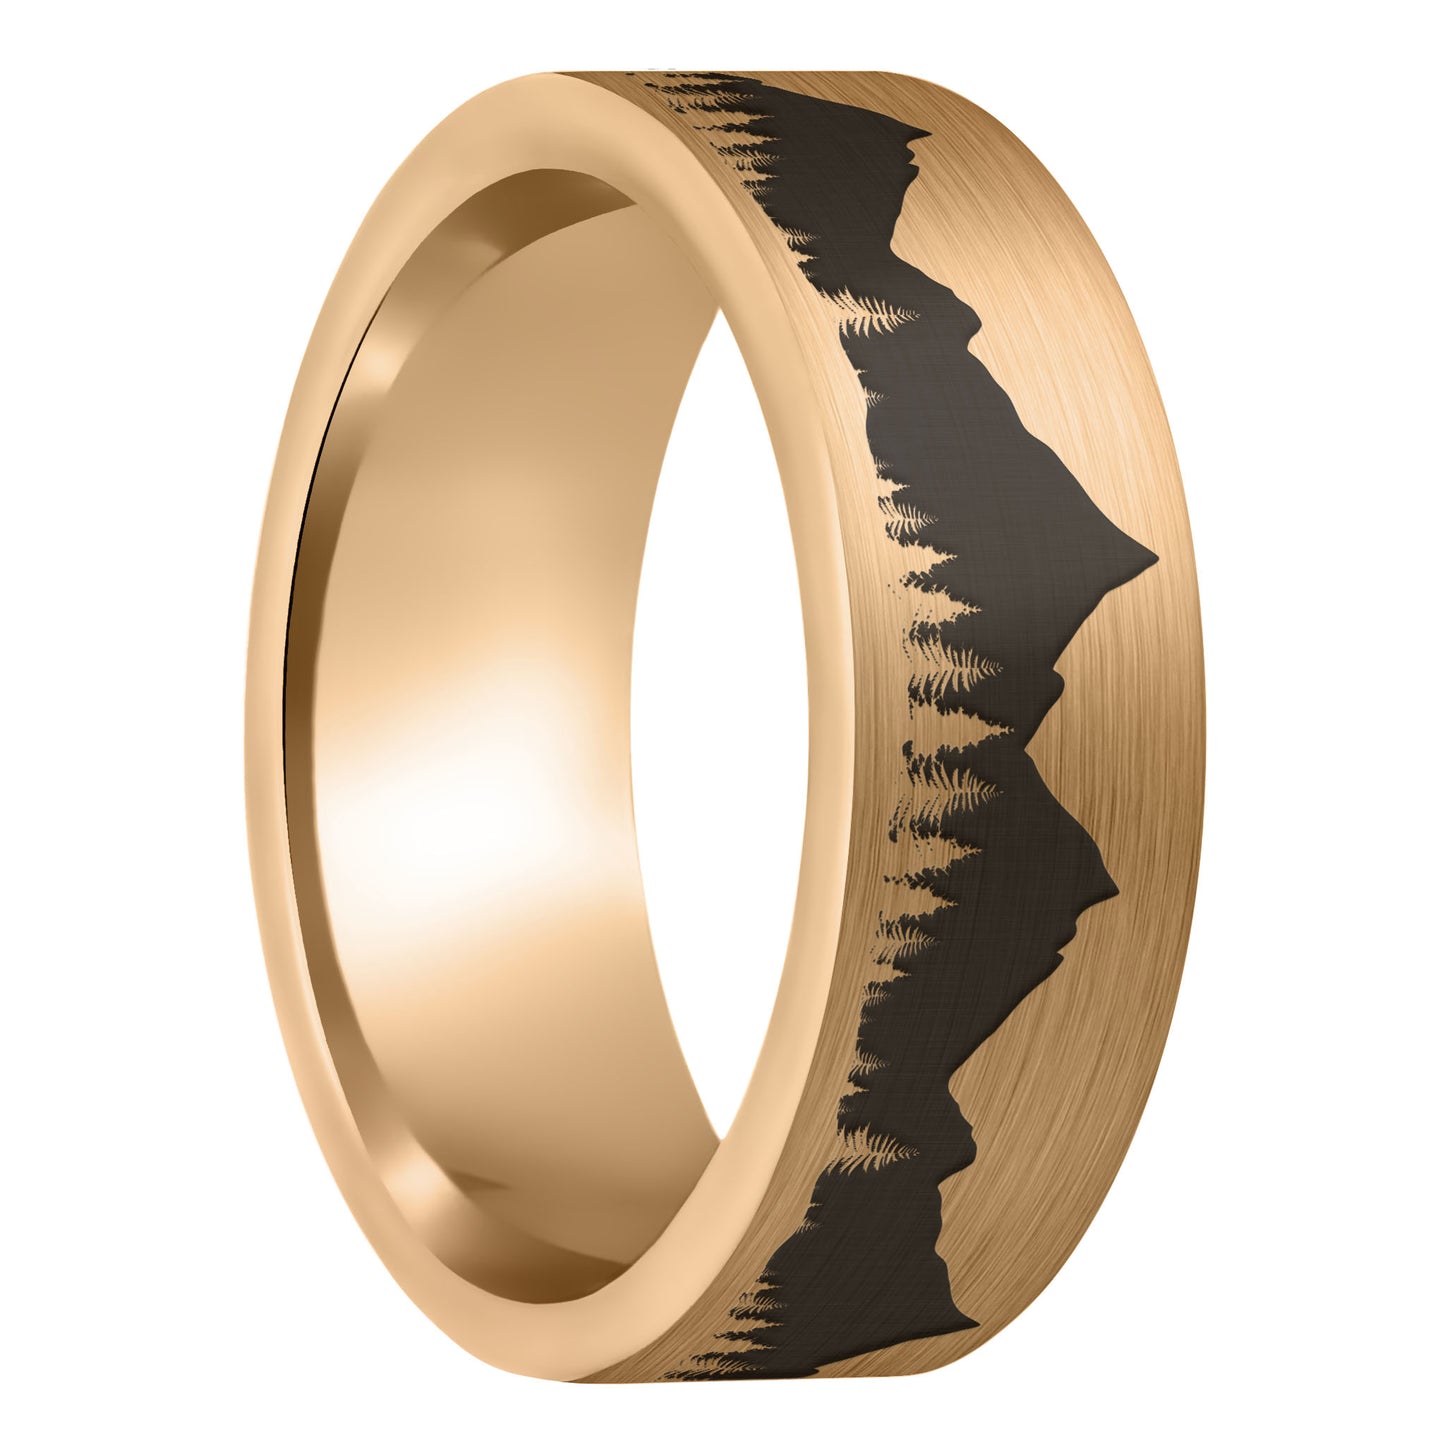 A treeline mountains brushed rose gold tungsten men's wedding band displayed on a plain white background.